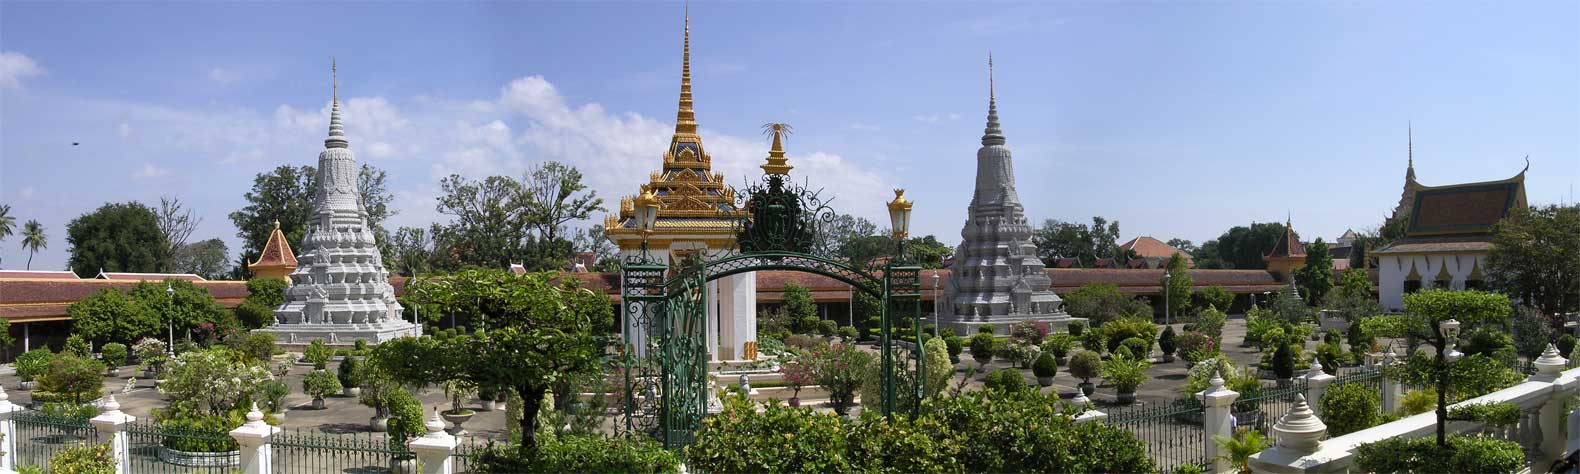 From the steps of the pagoda - from left to right: King Norodom's stupa, his equestrian statue, King Ang Duong's stupa, pavilion containing Buddha footprint<br />(composite of 3 photographs)